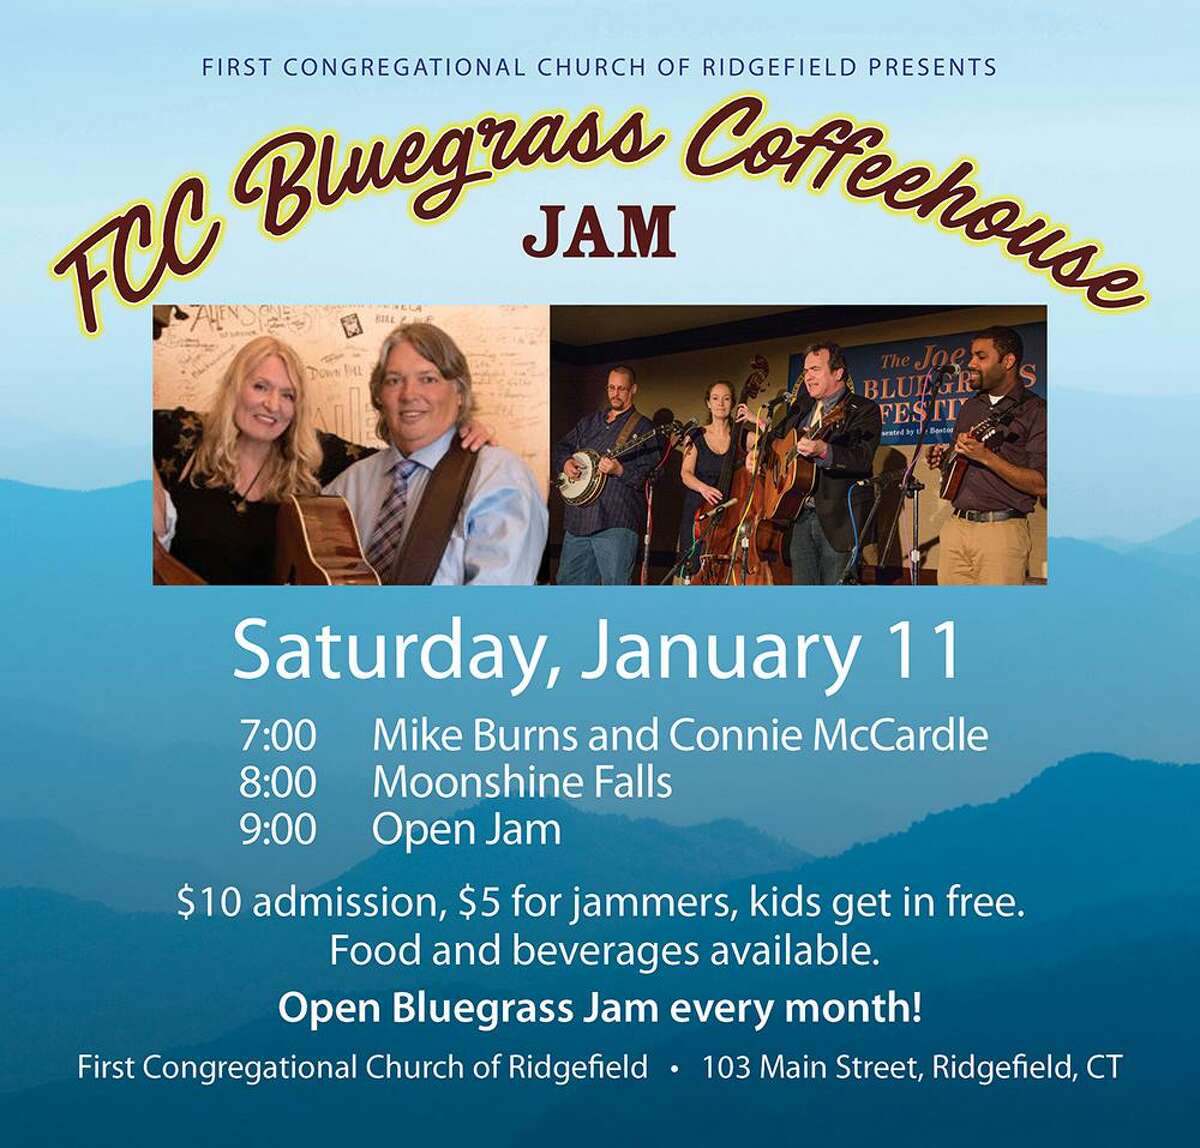 FCC Bluegrass Coffeehouse will host Moonshine Falls and the duet of Mike Burns and Connie McCardle on Saturday, Jan. 11.